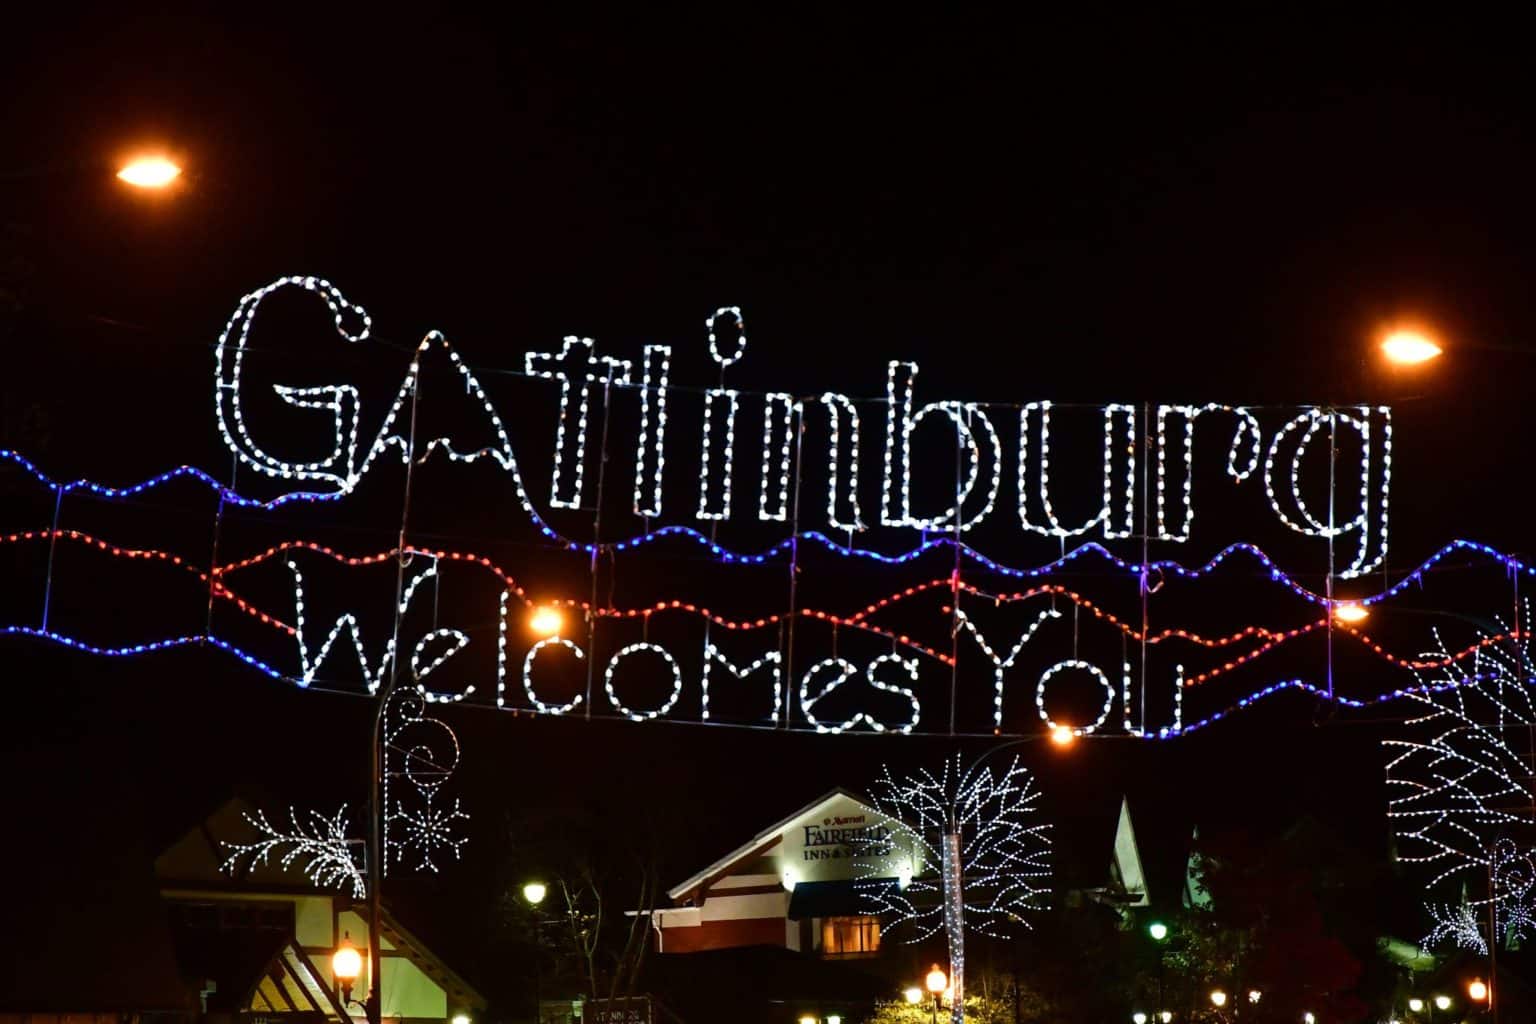 Everything You Need to Know About the Gatlinburg Christmas Parade